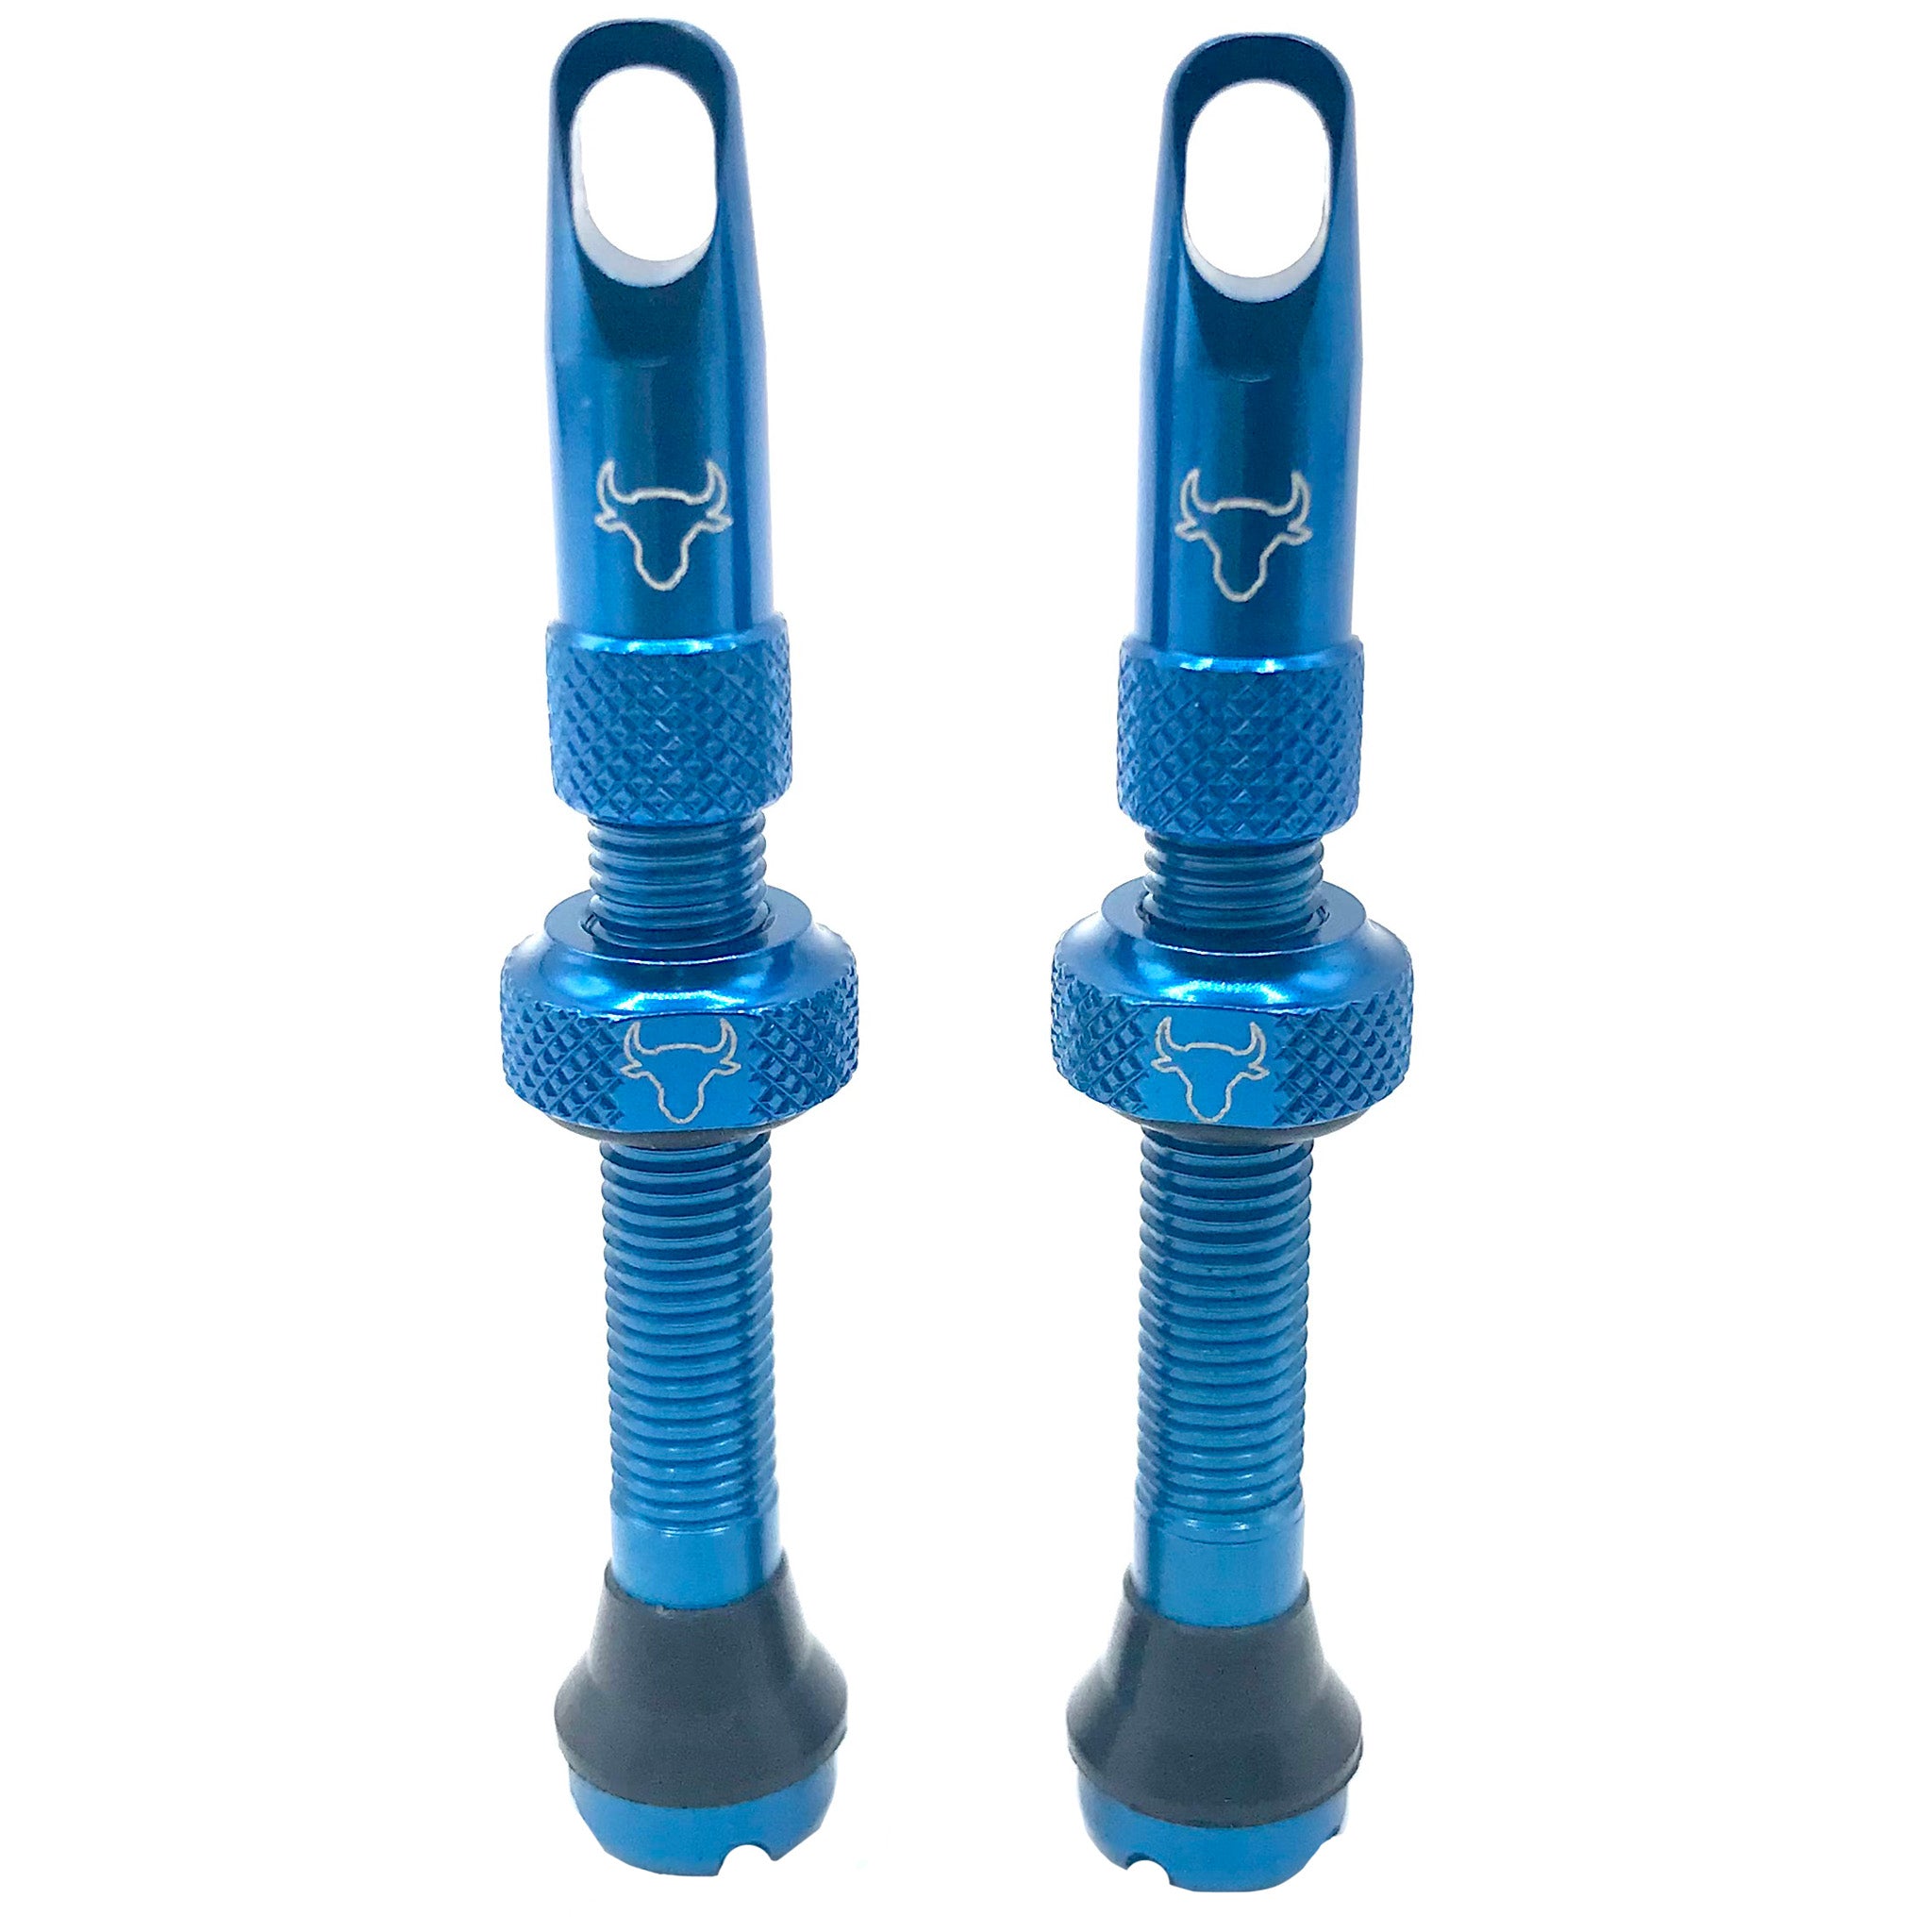 Hold Fast Cycling Tubeless Valve Stem 42mm (Pair) - Sky Blue